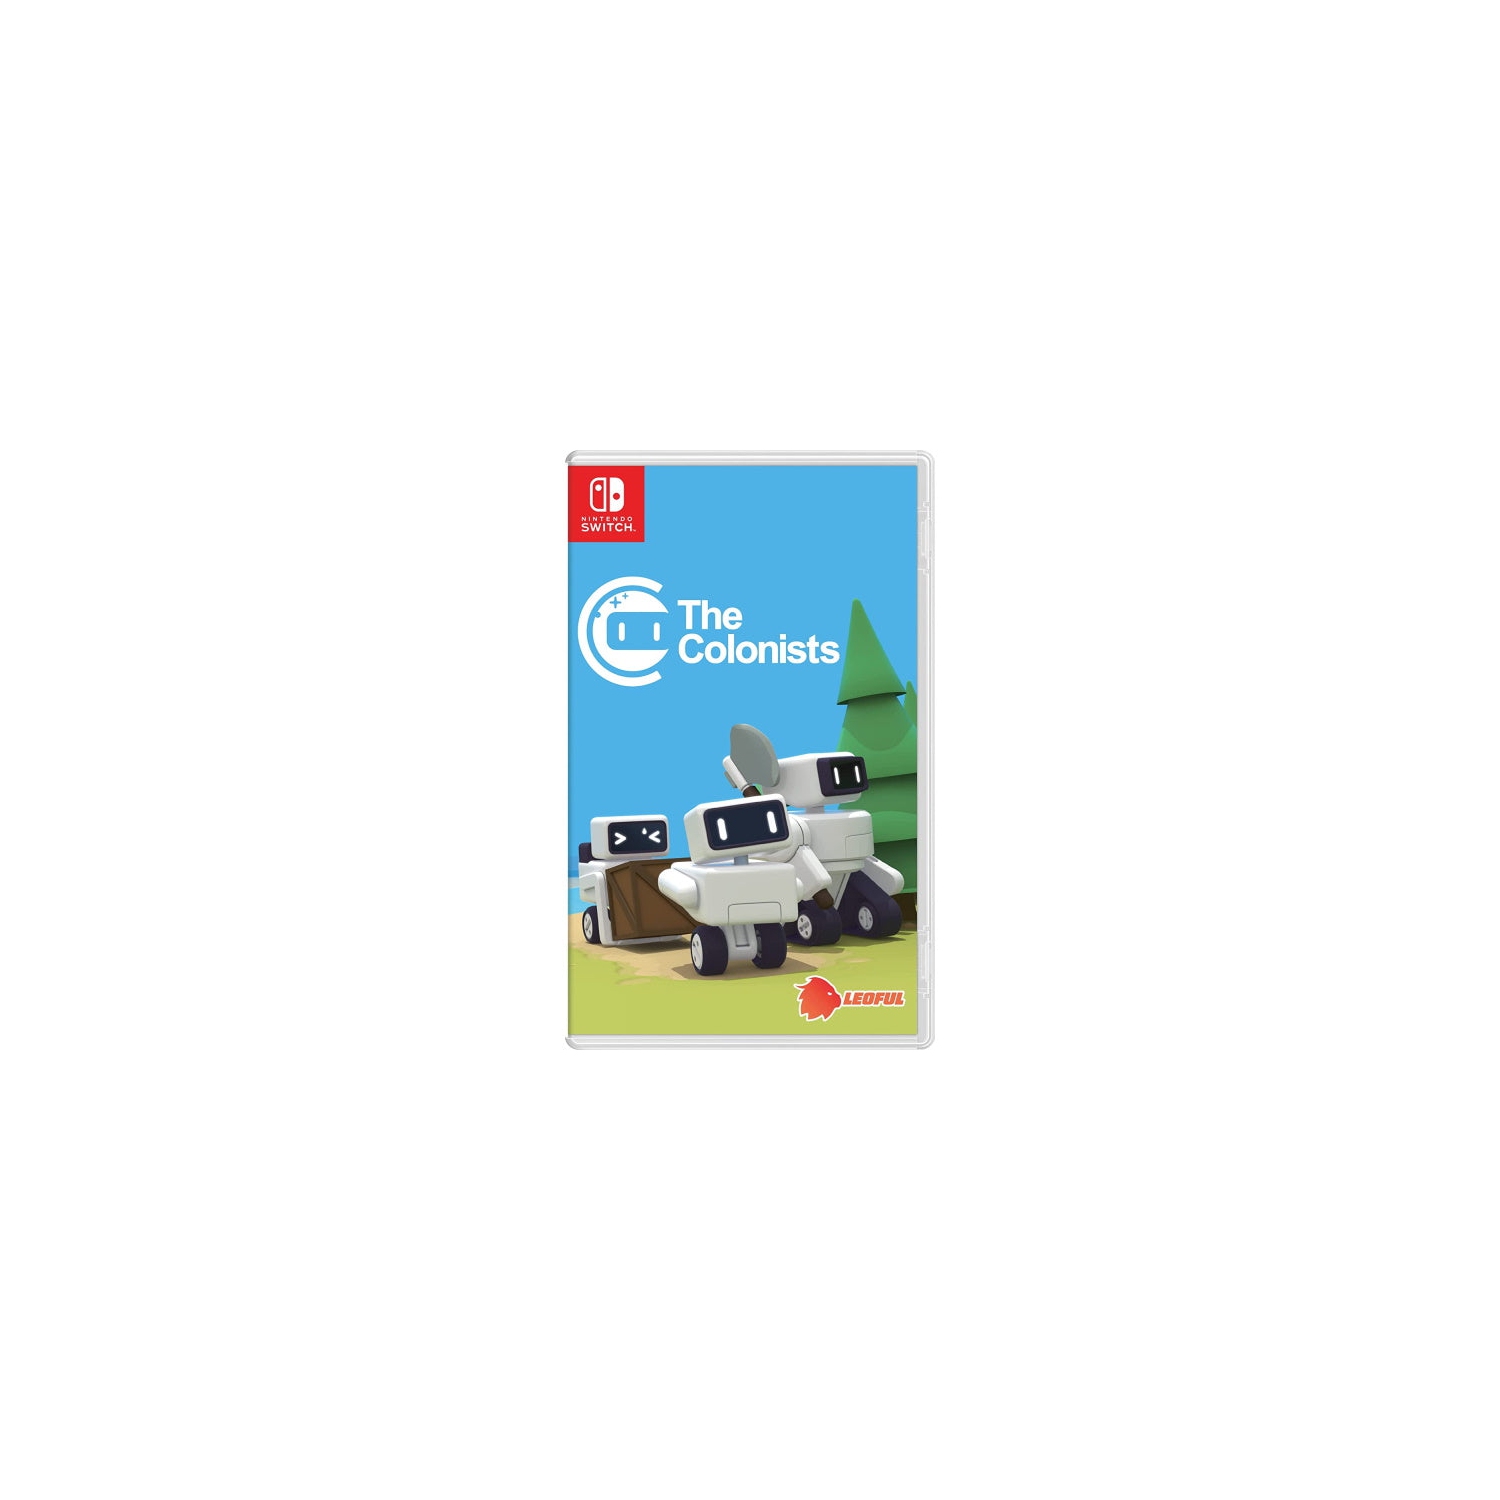 The Colonists [Nintendo Switch]